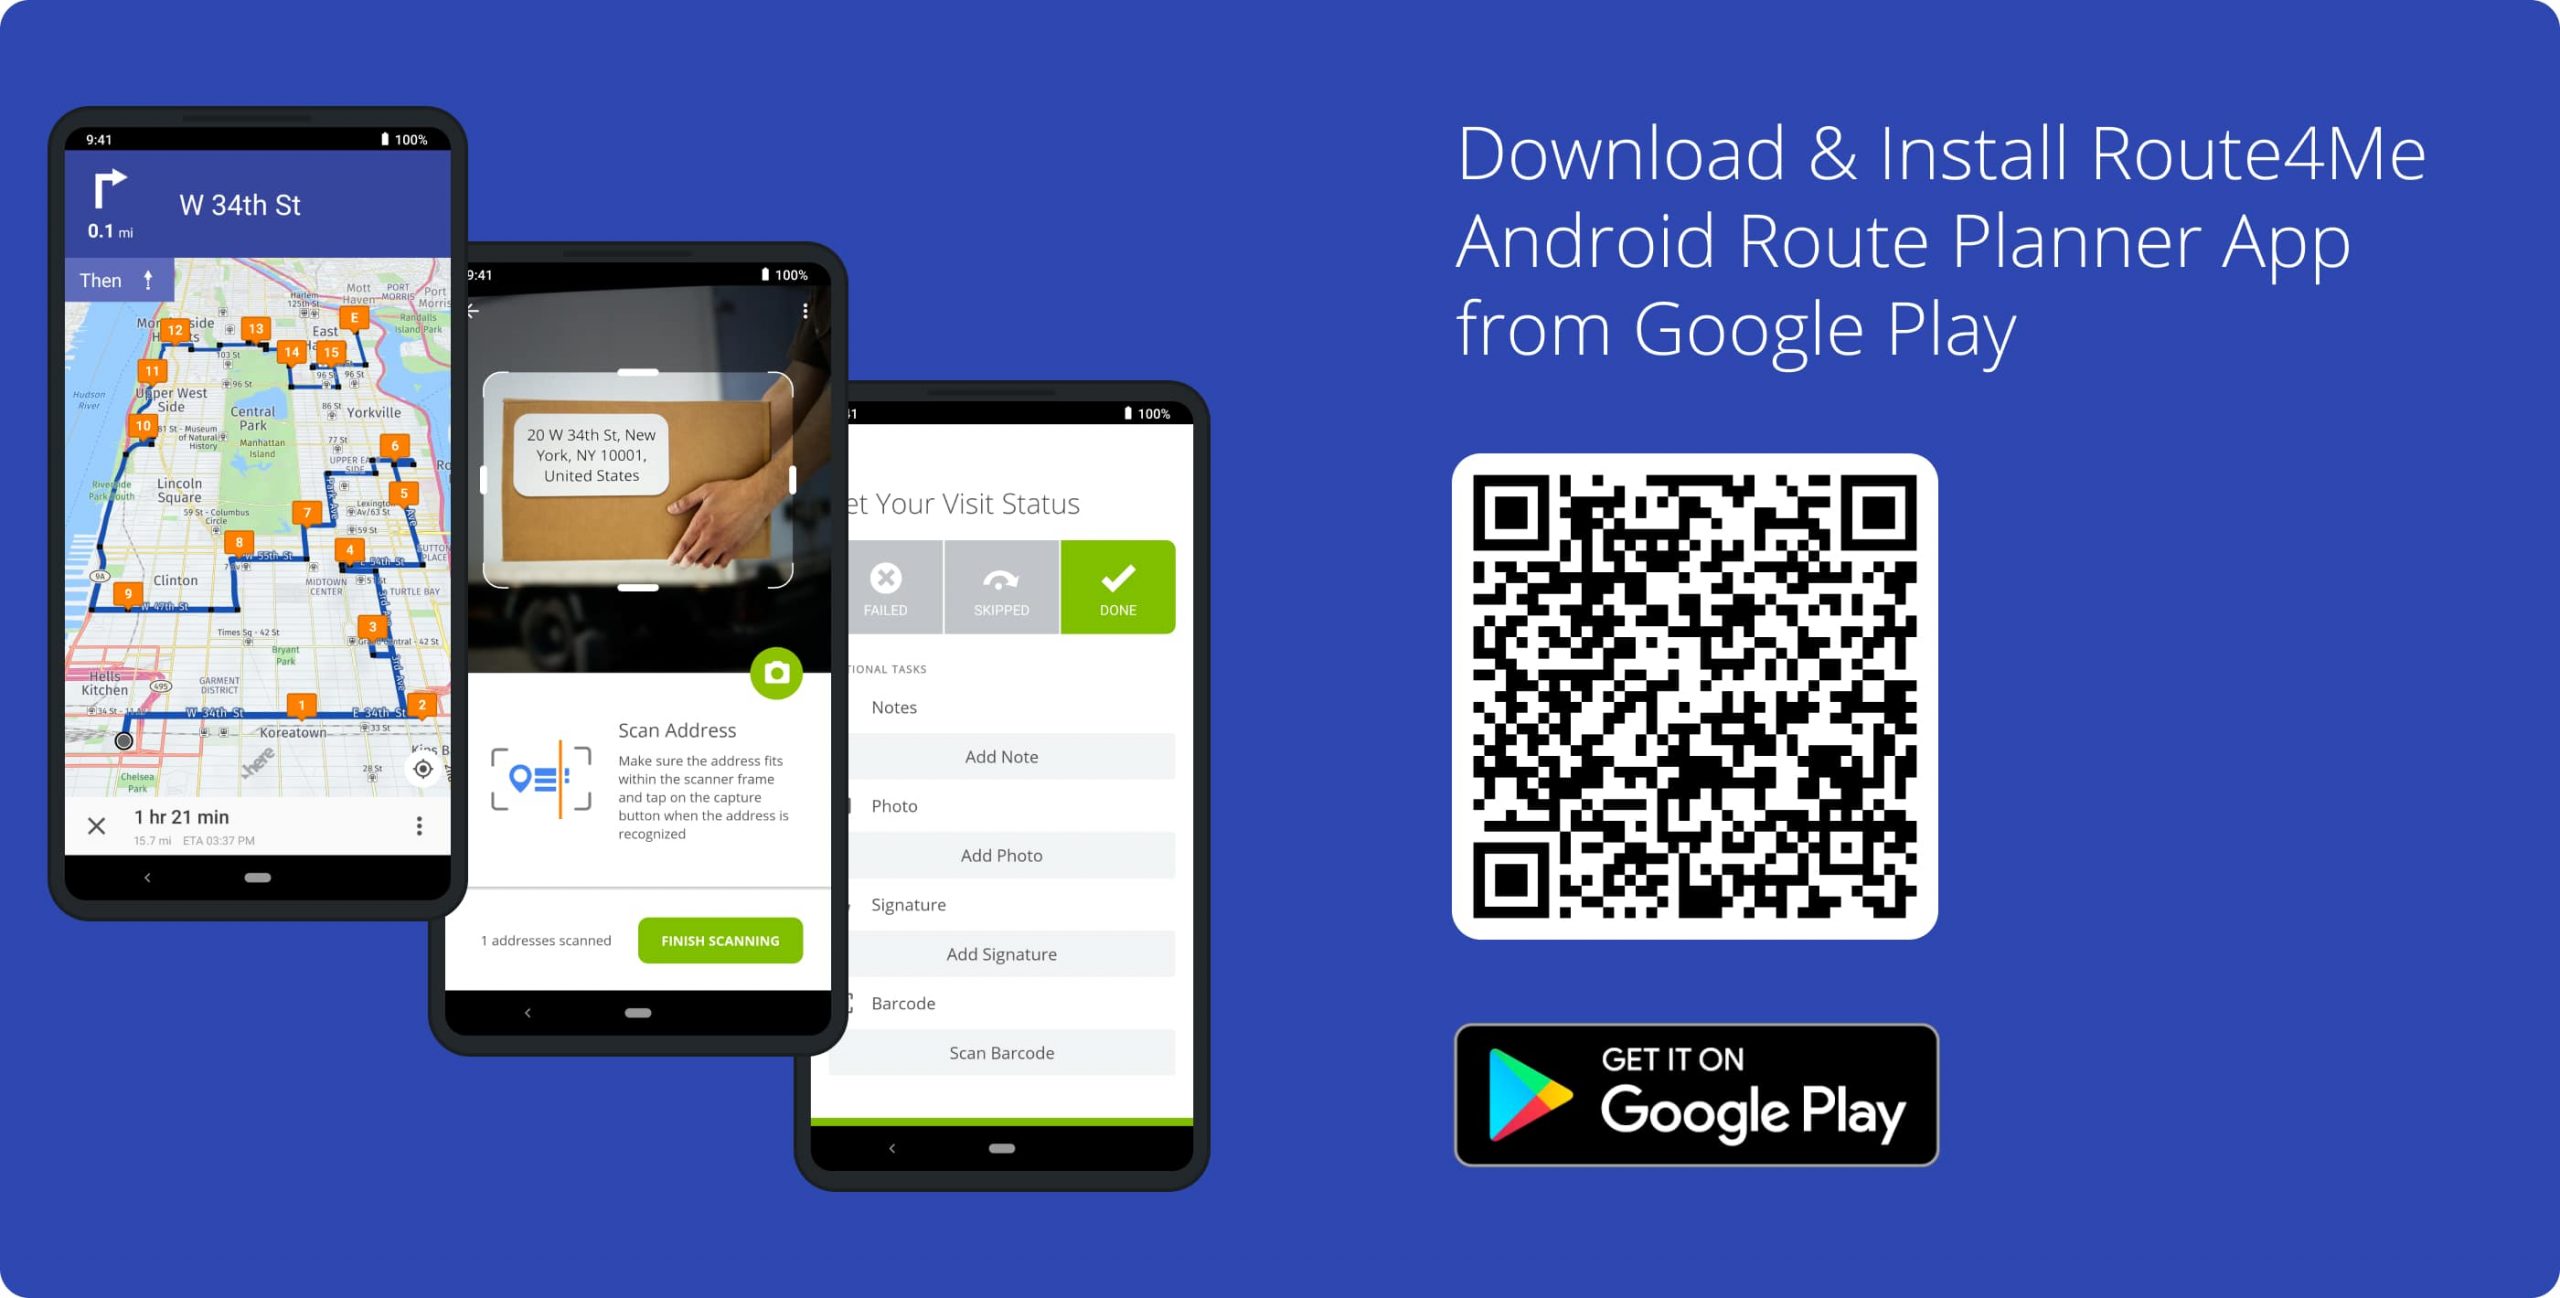 Install the Android Route Planner app and register for a Route4Me Mobile account.